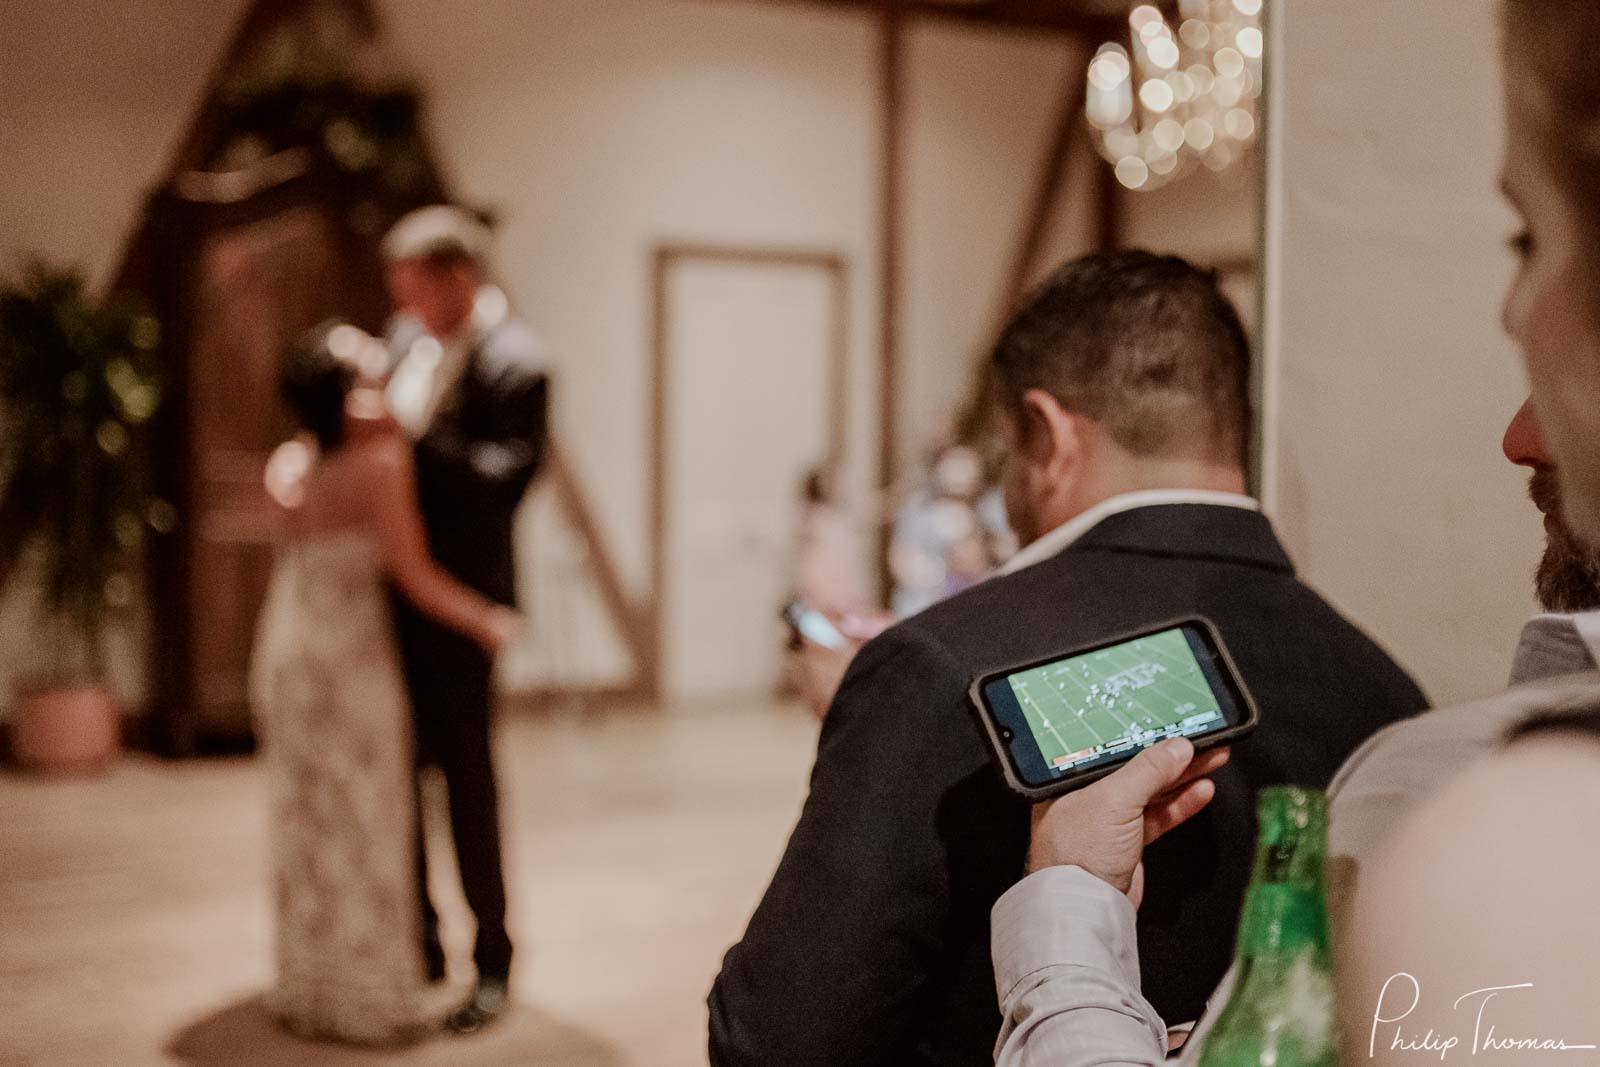 During first dance a guest plays a football game on her phone - Club Giraud Wedding Reception San Antonio weddings Philip Thomas Photography